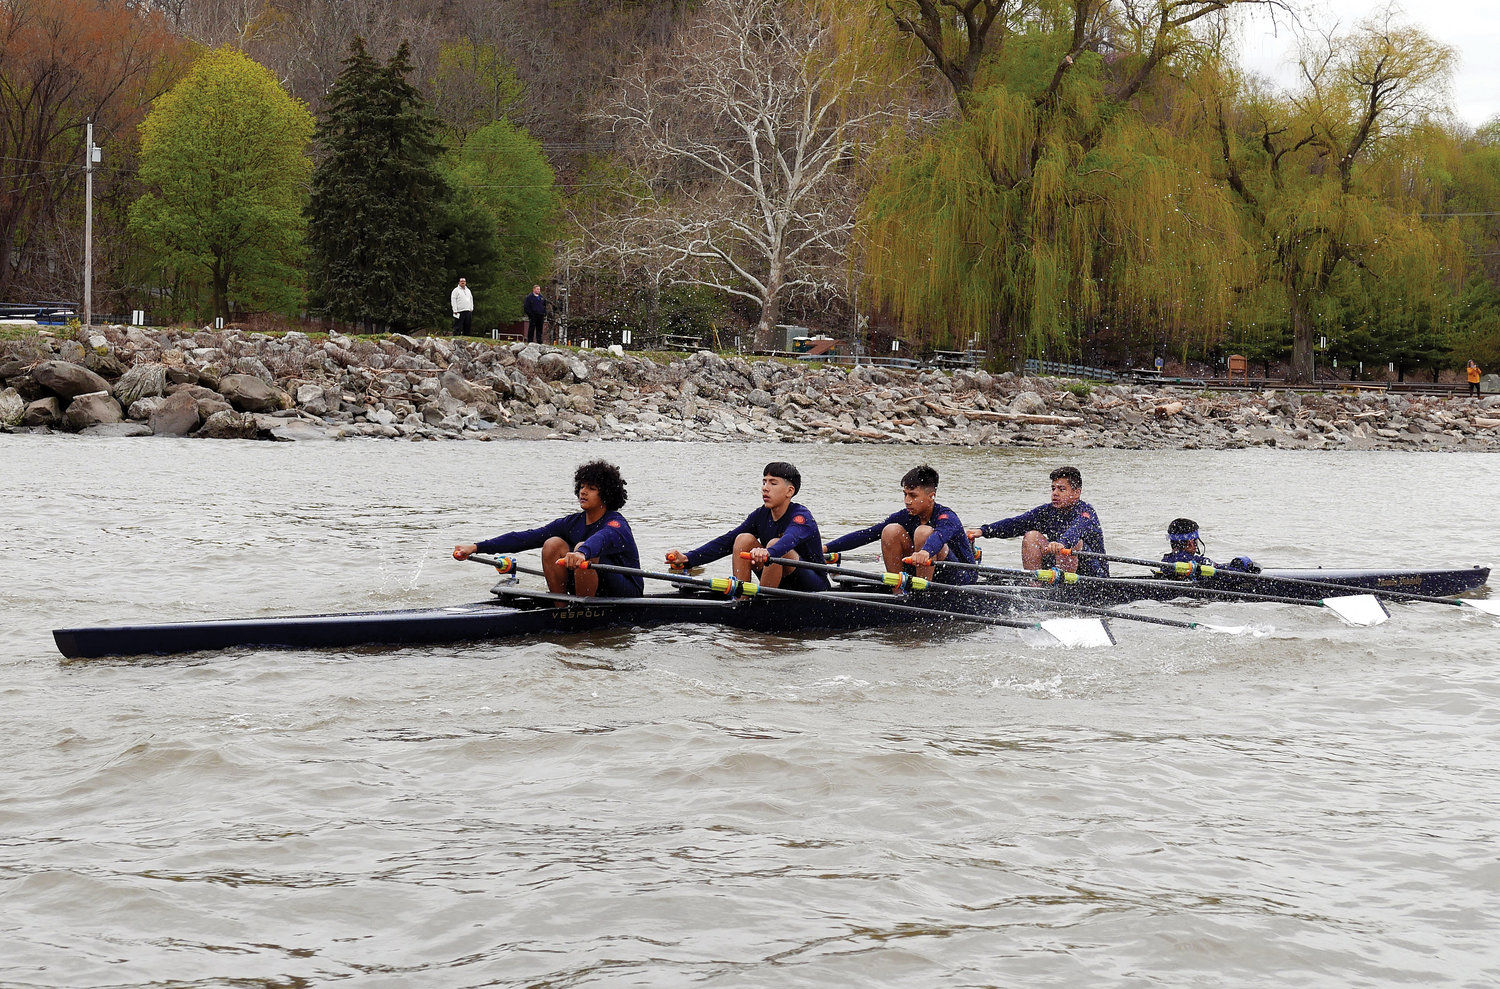 The San Miguel rowing program’s quad boat, shown practicing on the Hudson River in Cornwall-on-Hudson April 25, is one of two school boats scheduled to compete at the USRowing Northeast Youth Championships in Lowell, Mass., May 21-22.